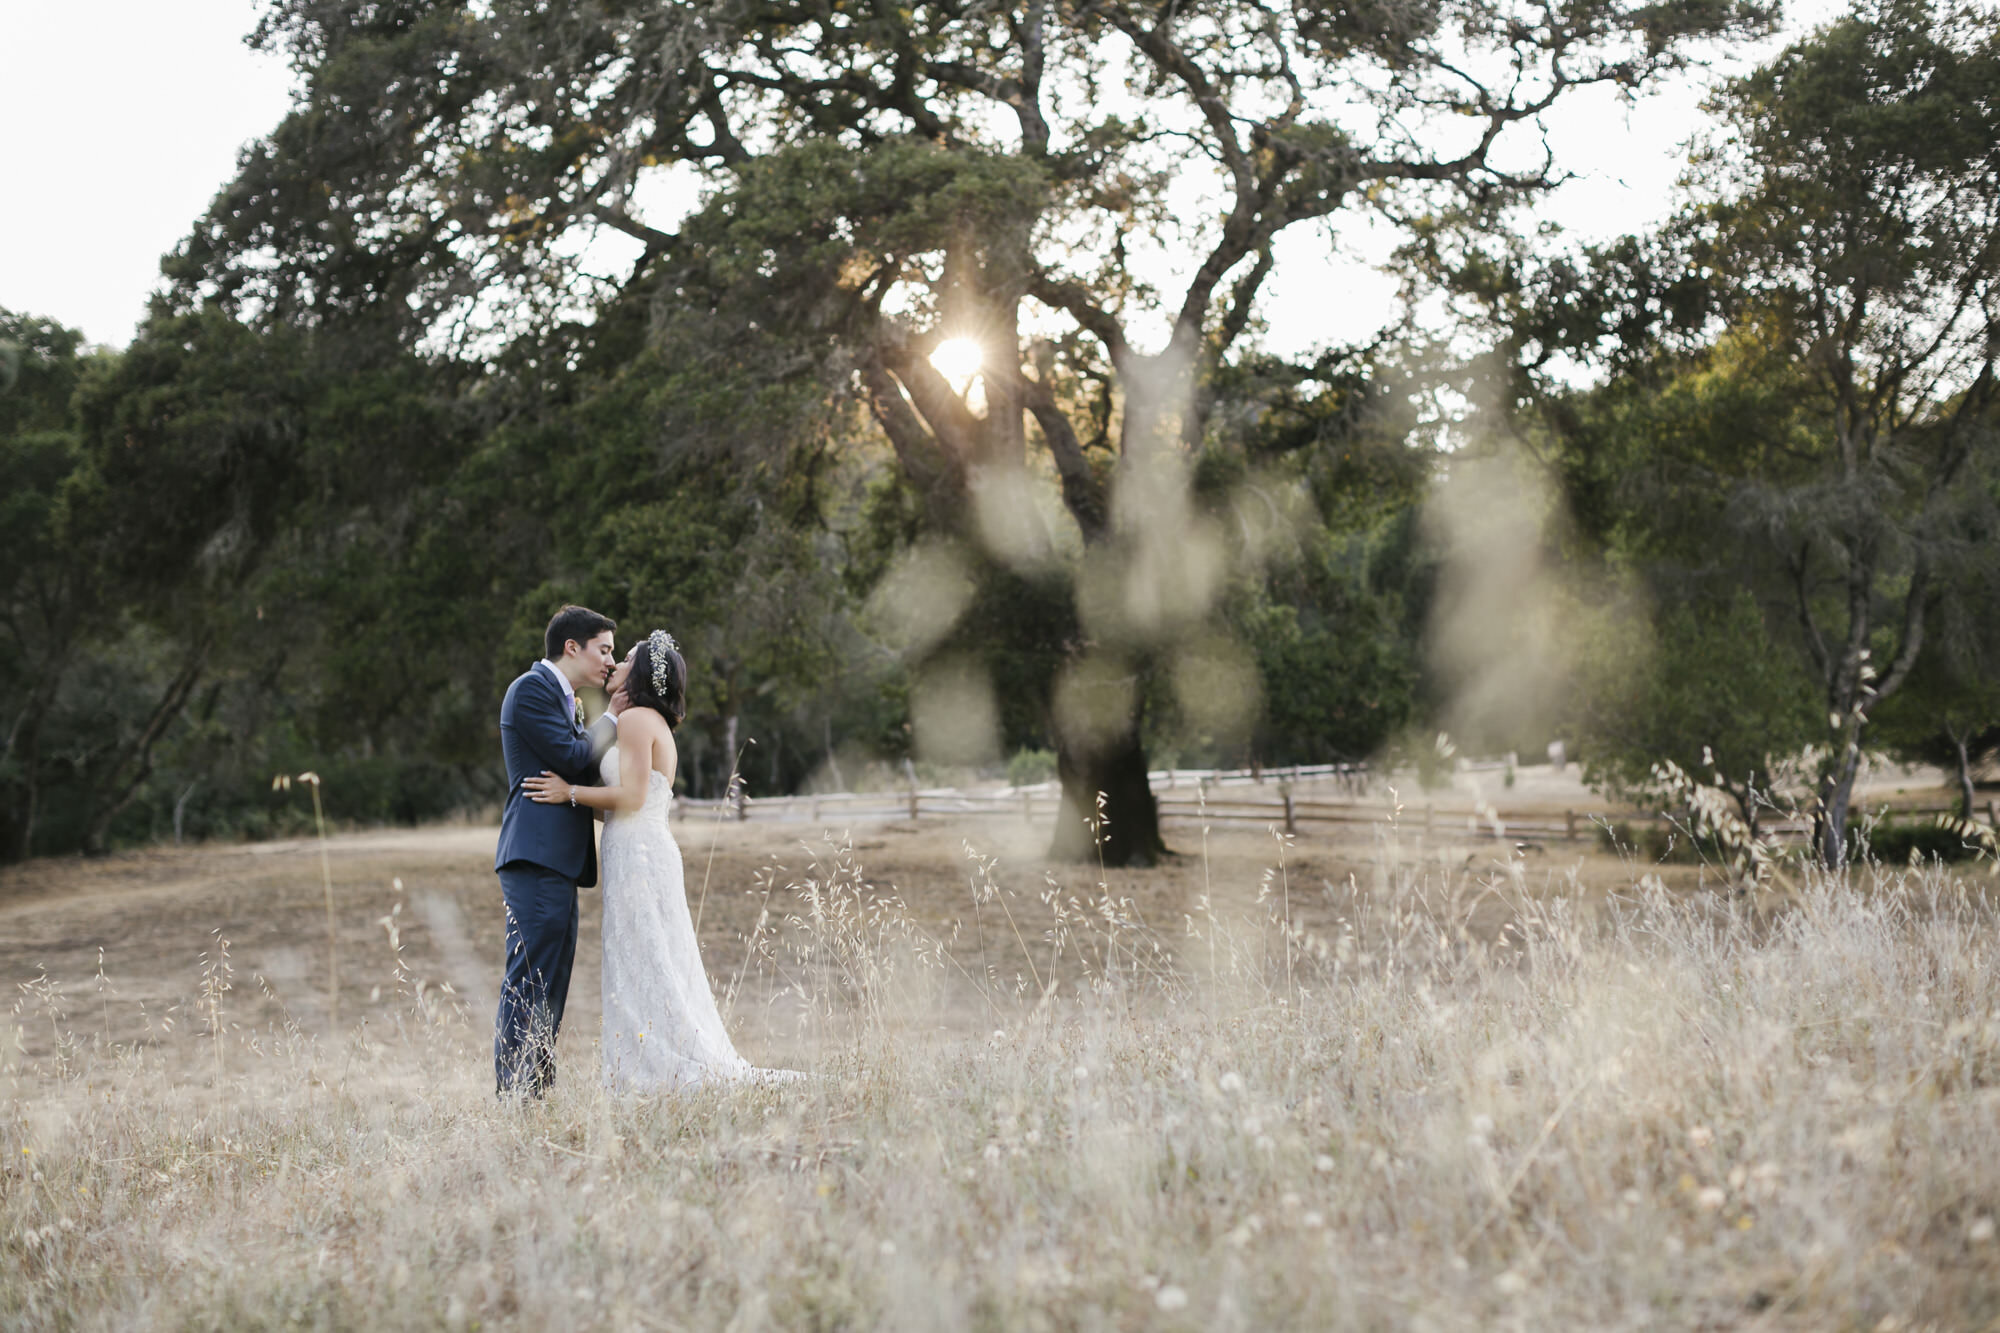 Bride and groom at sunset for their wedding portraits